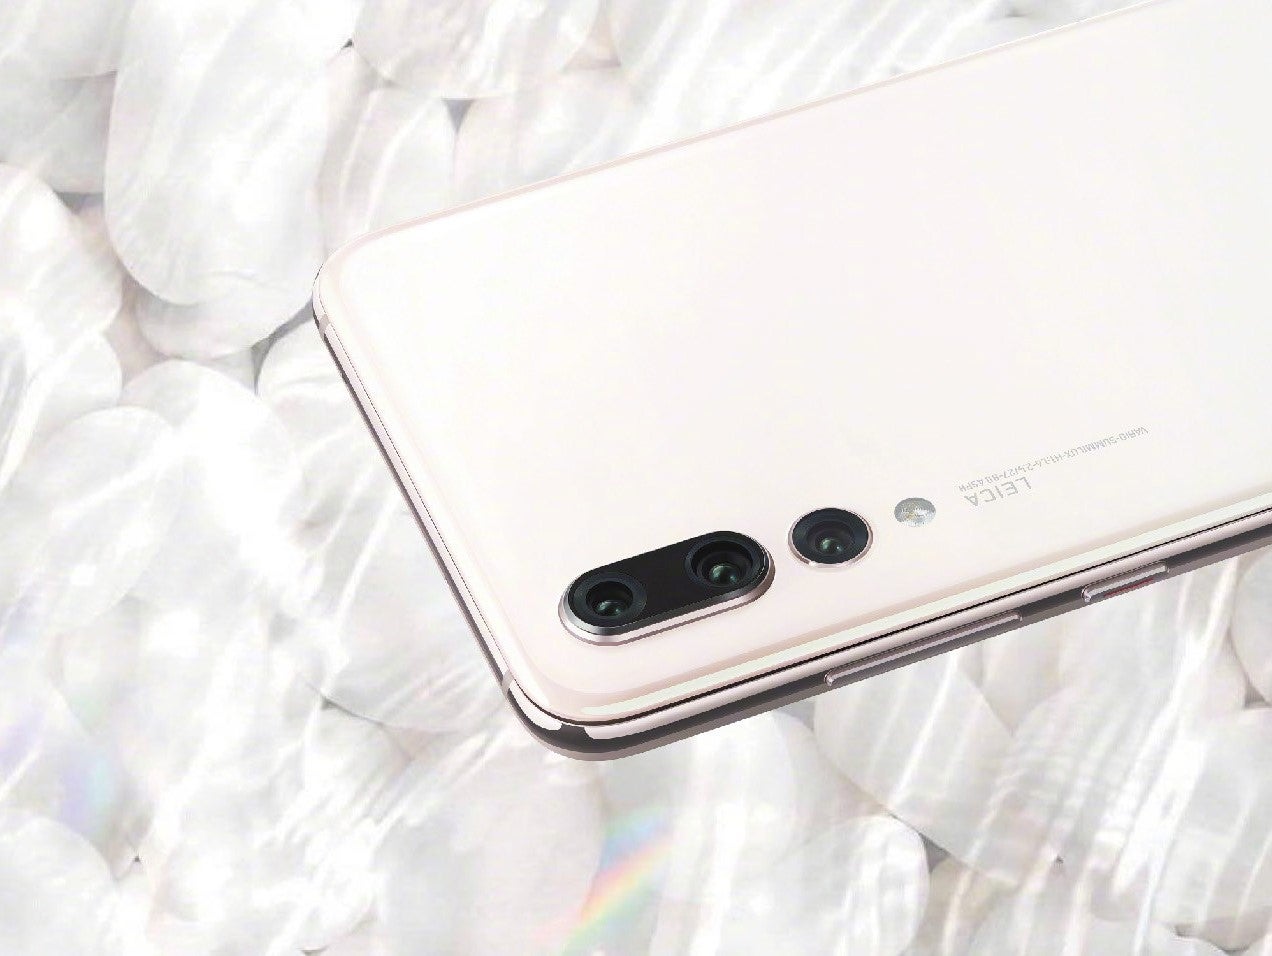 [Test] Huawei Released Just 500 Pearl White P20 Pros And M'sians Are Already Going Crazy - World Of Buzz 1